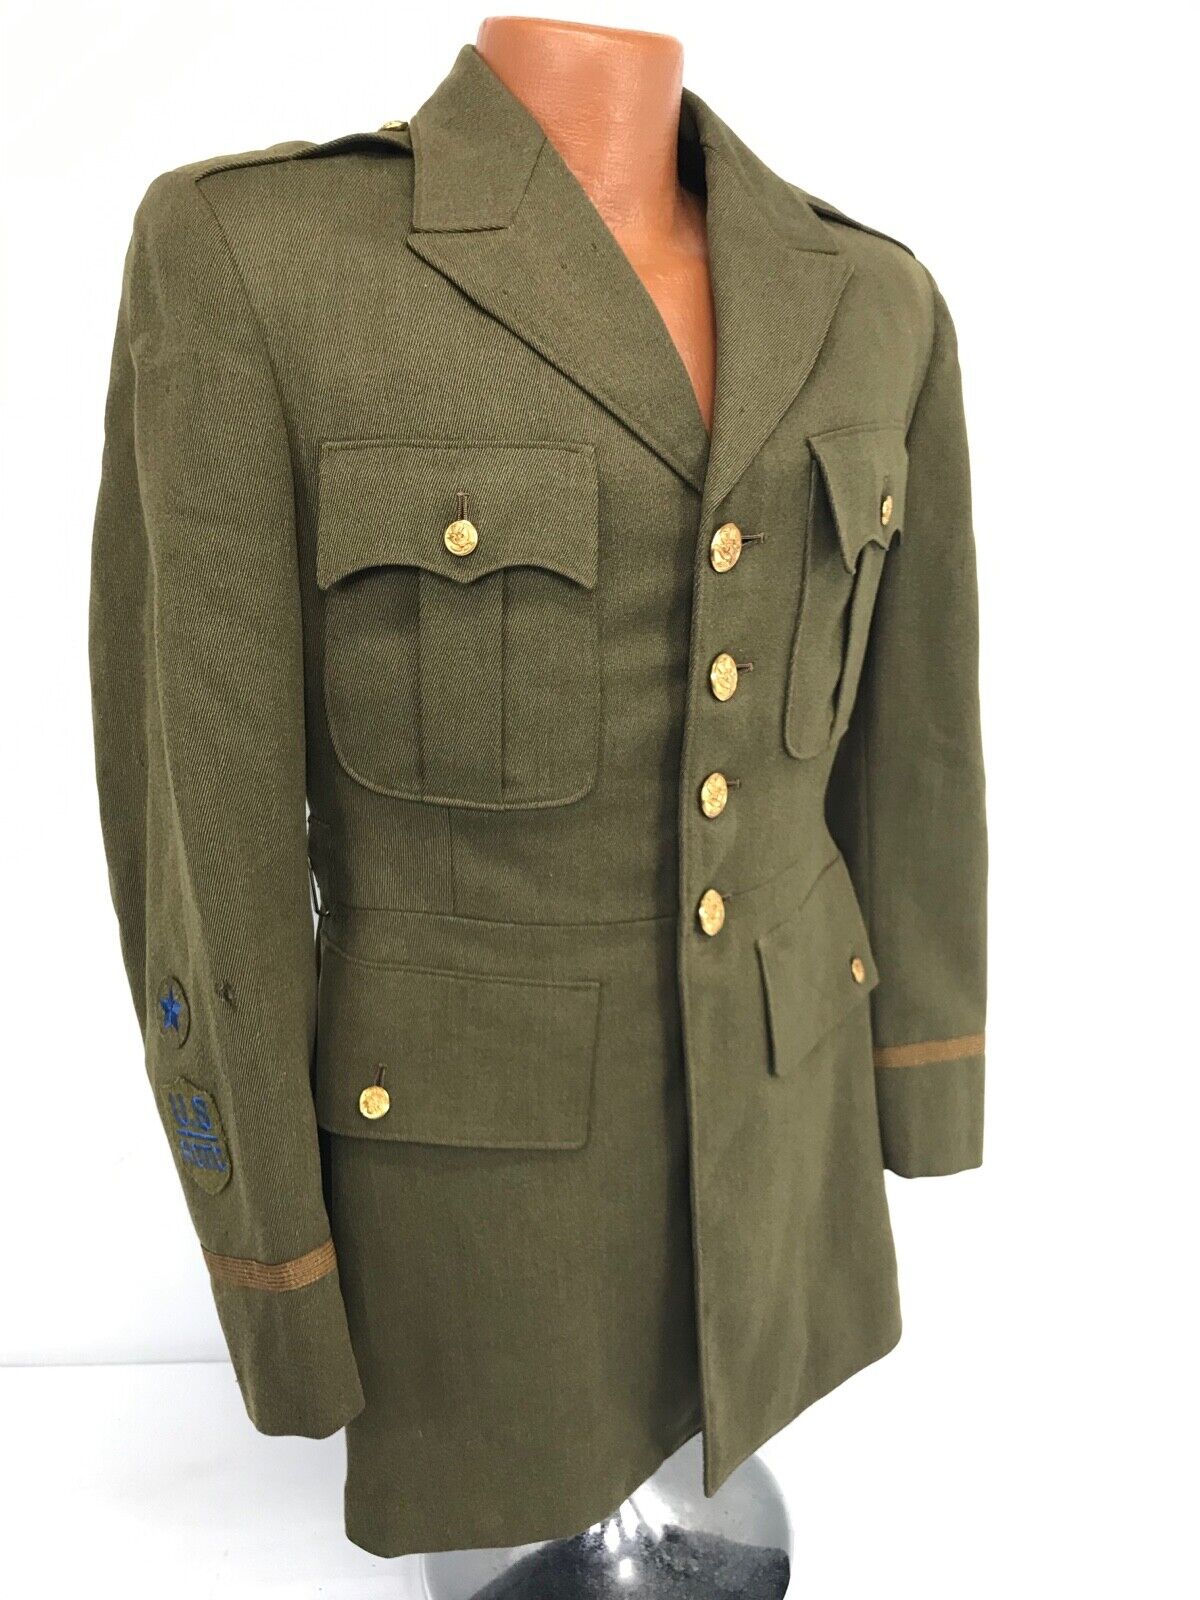 1937 US Army ROTC Named Officers Dress Tunic for Sale - Fleetwoodmac.net